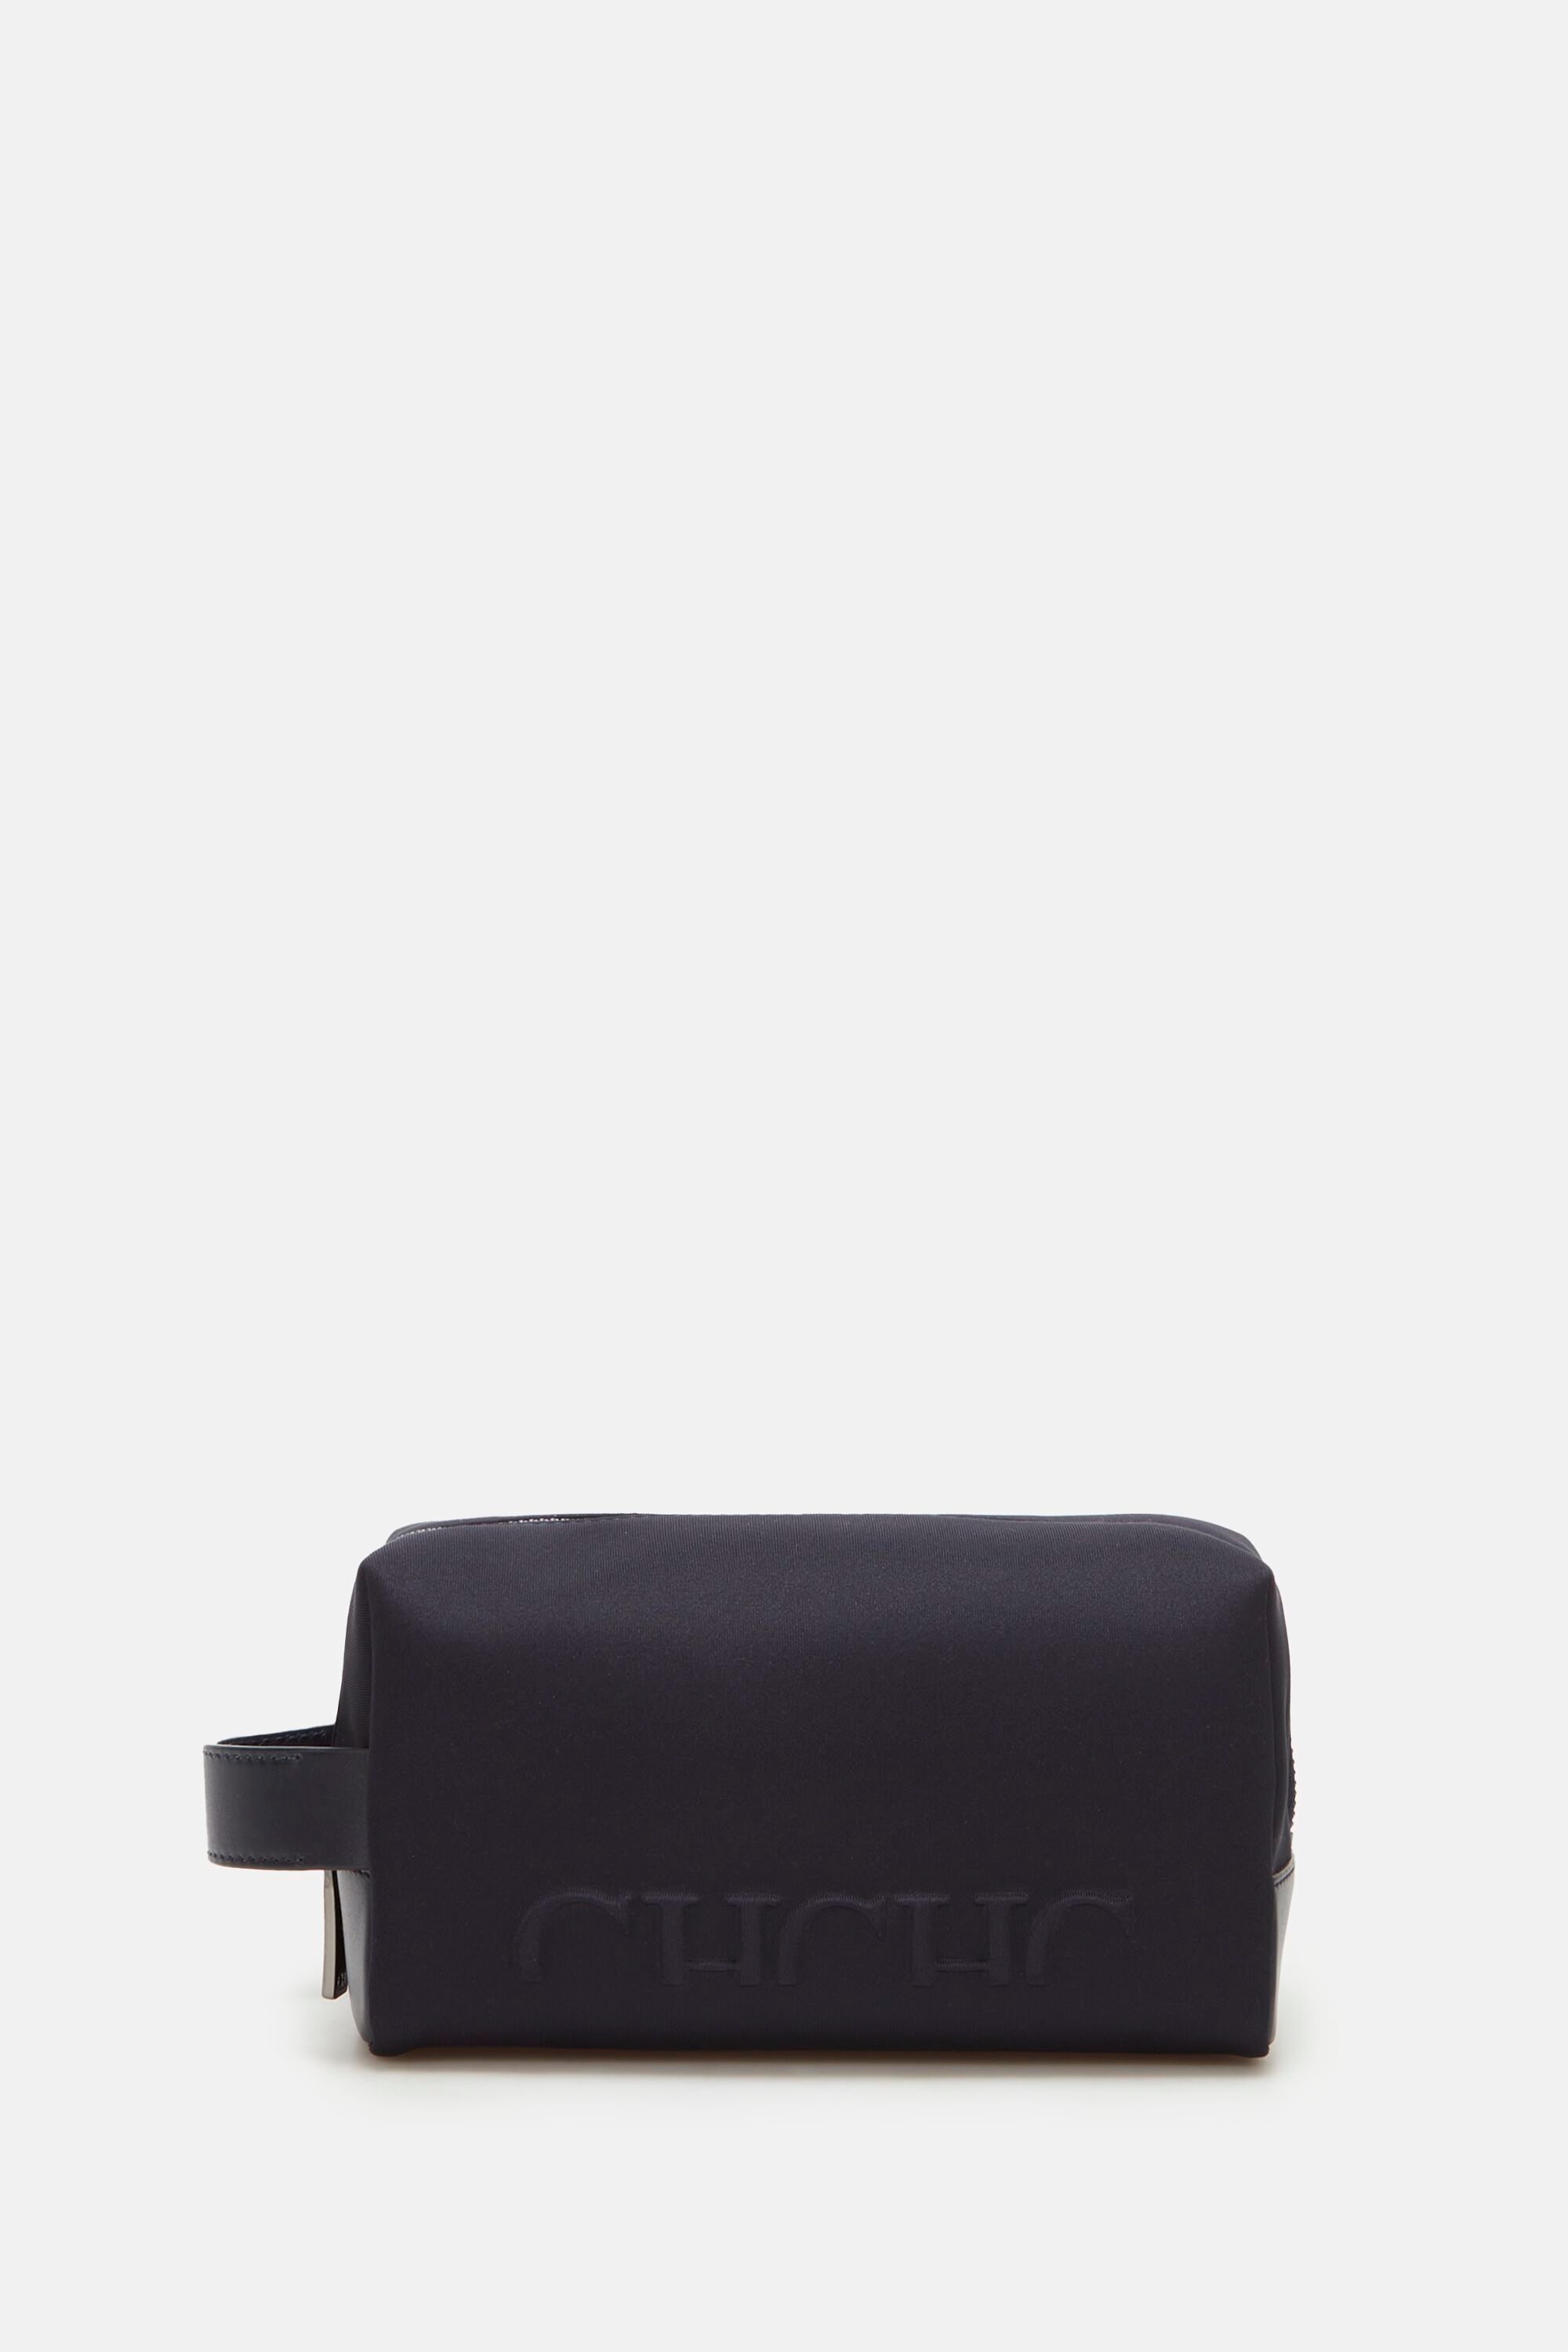 CHHC | Toiletry case